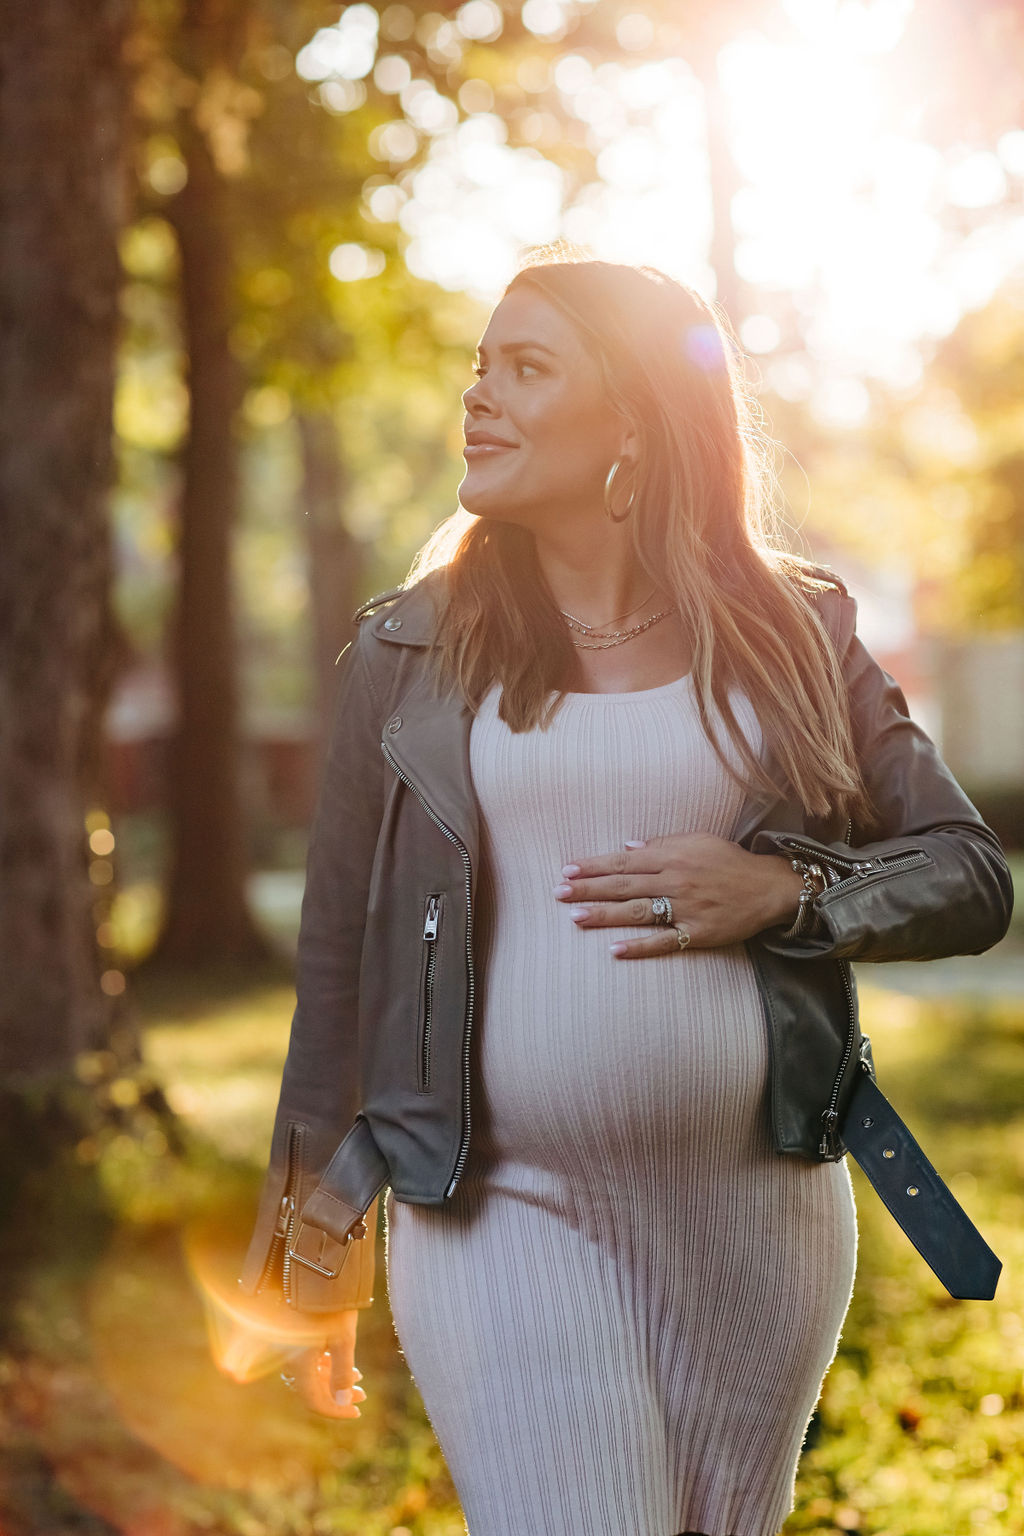 What to wear for maternity photos 